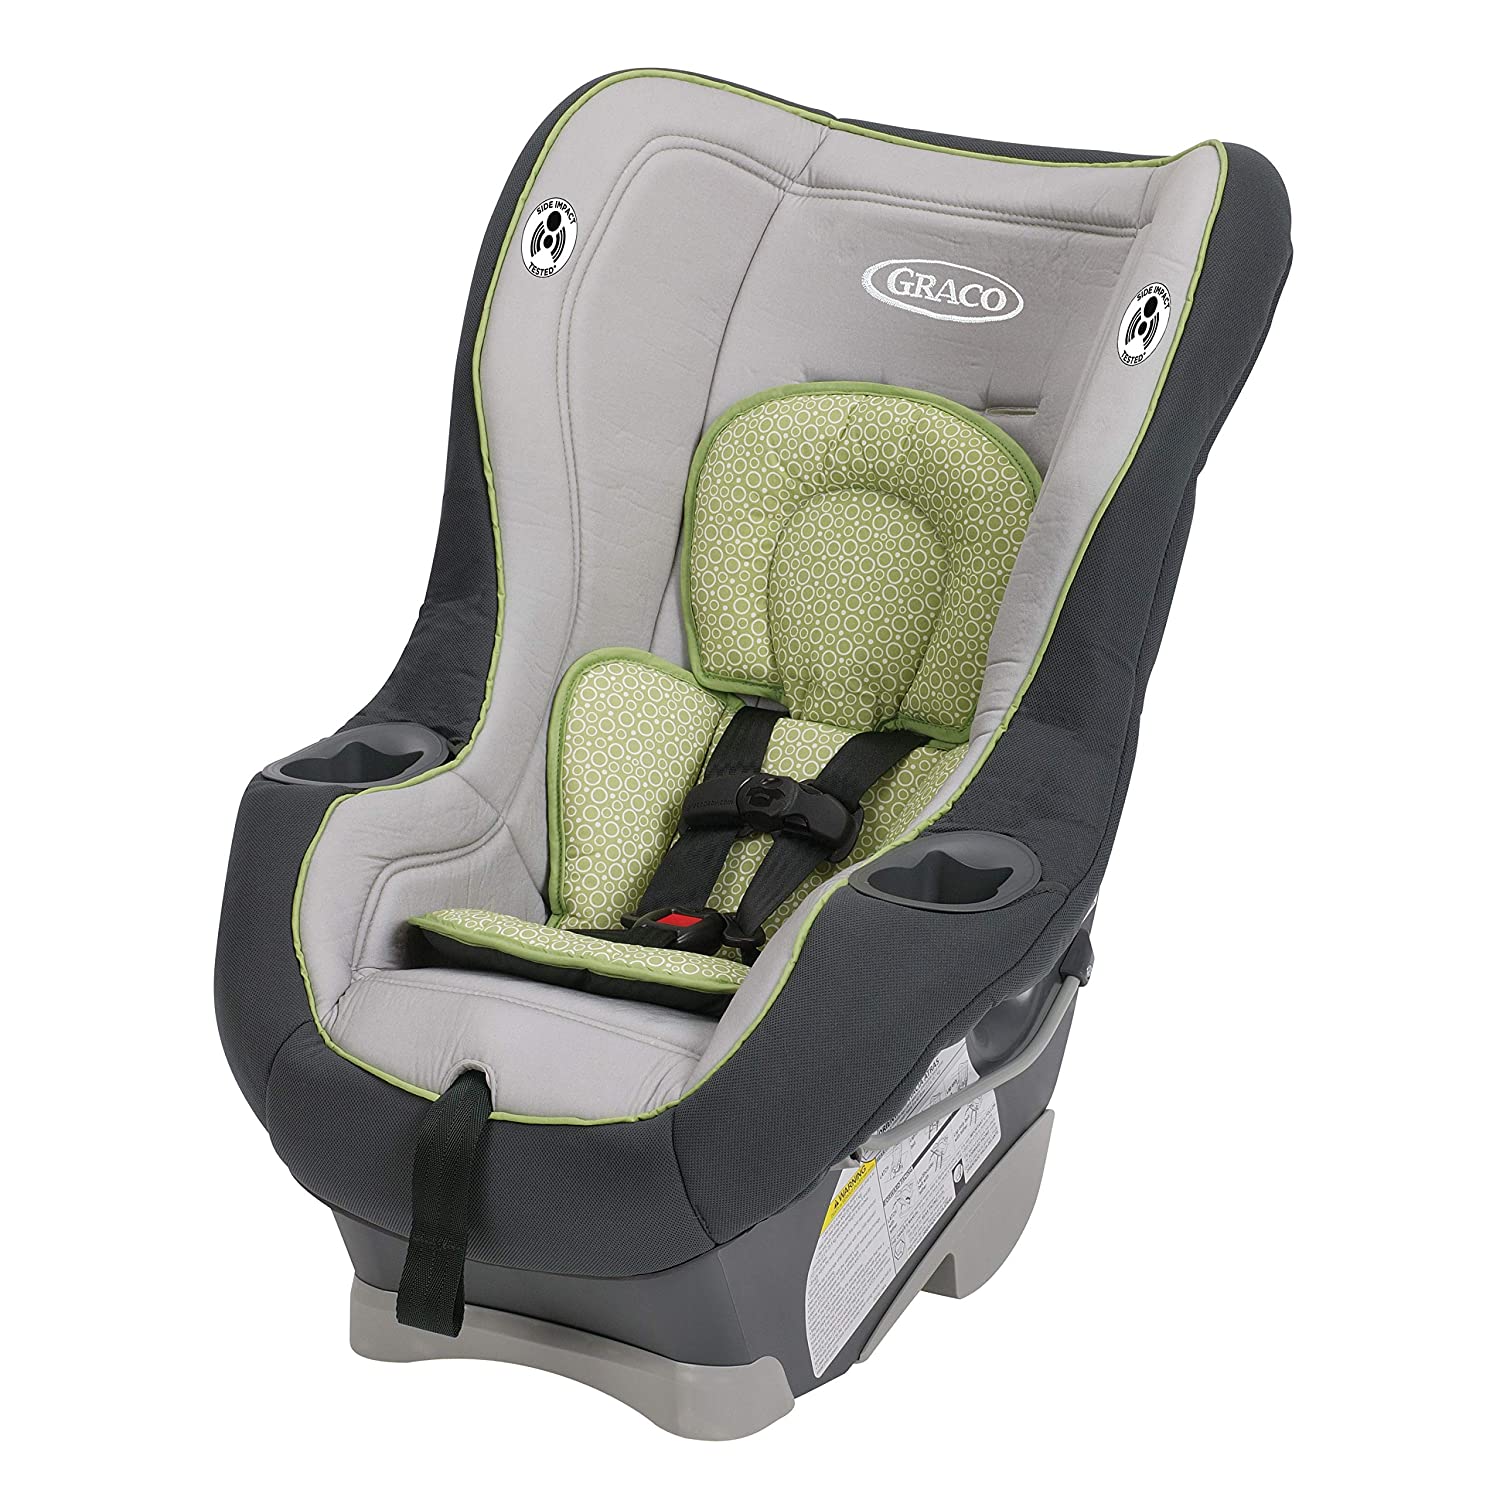 Top 5 Best Affordable Convertible Car Seats Reviews in 2022 2